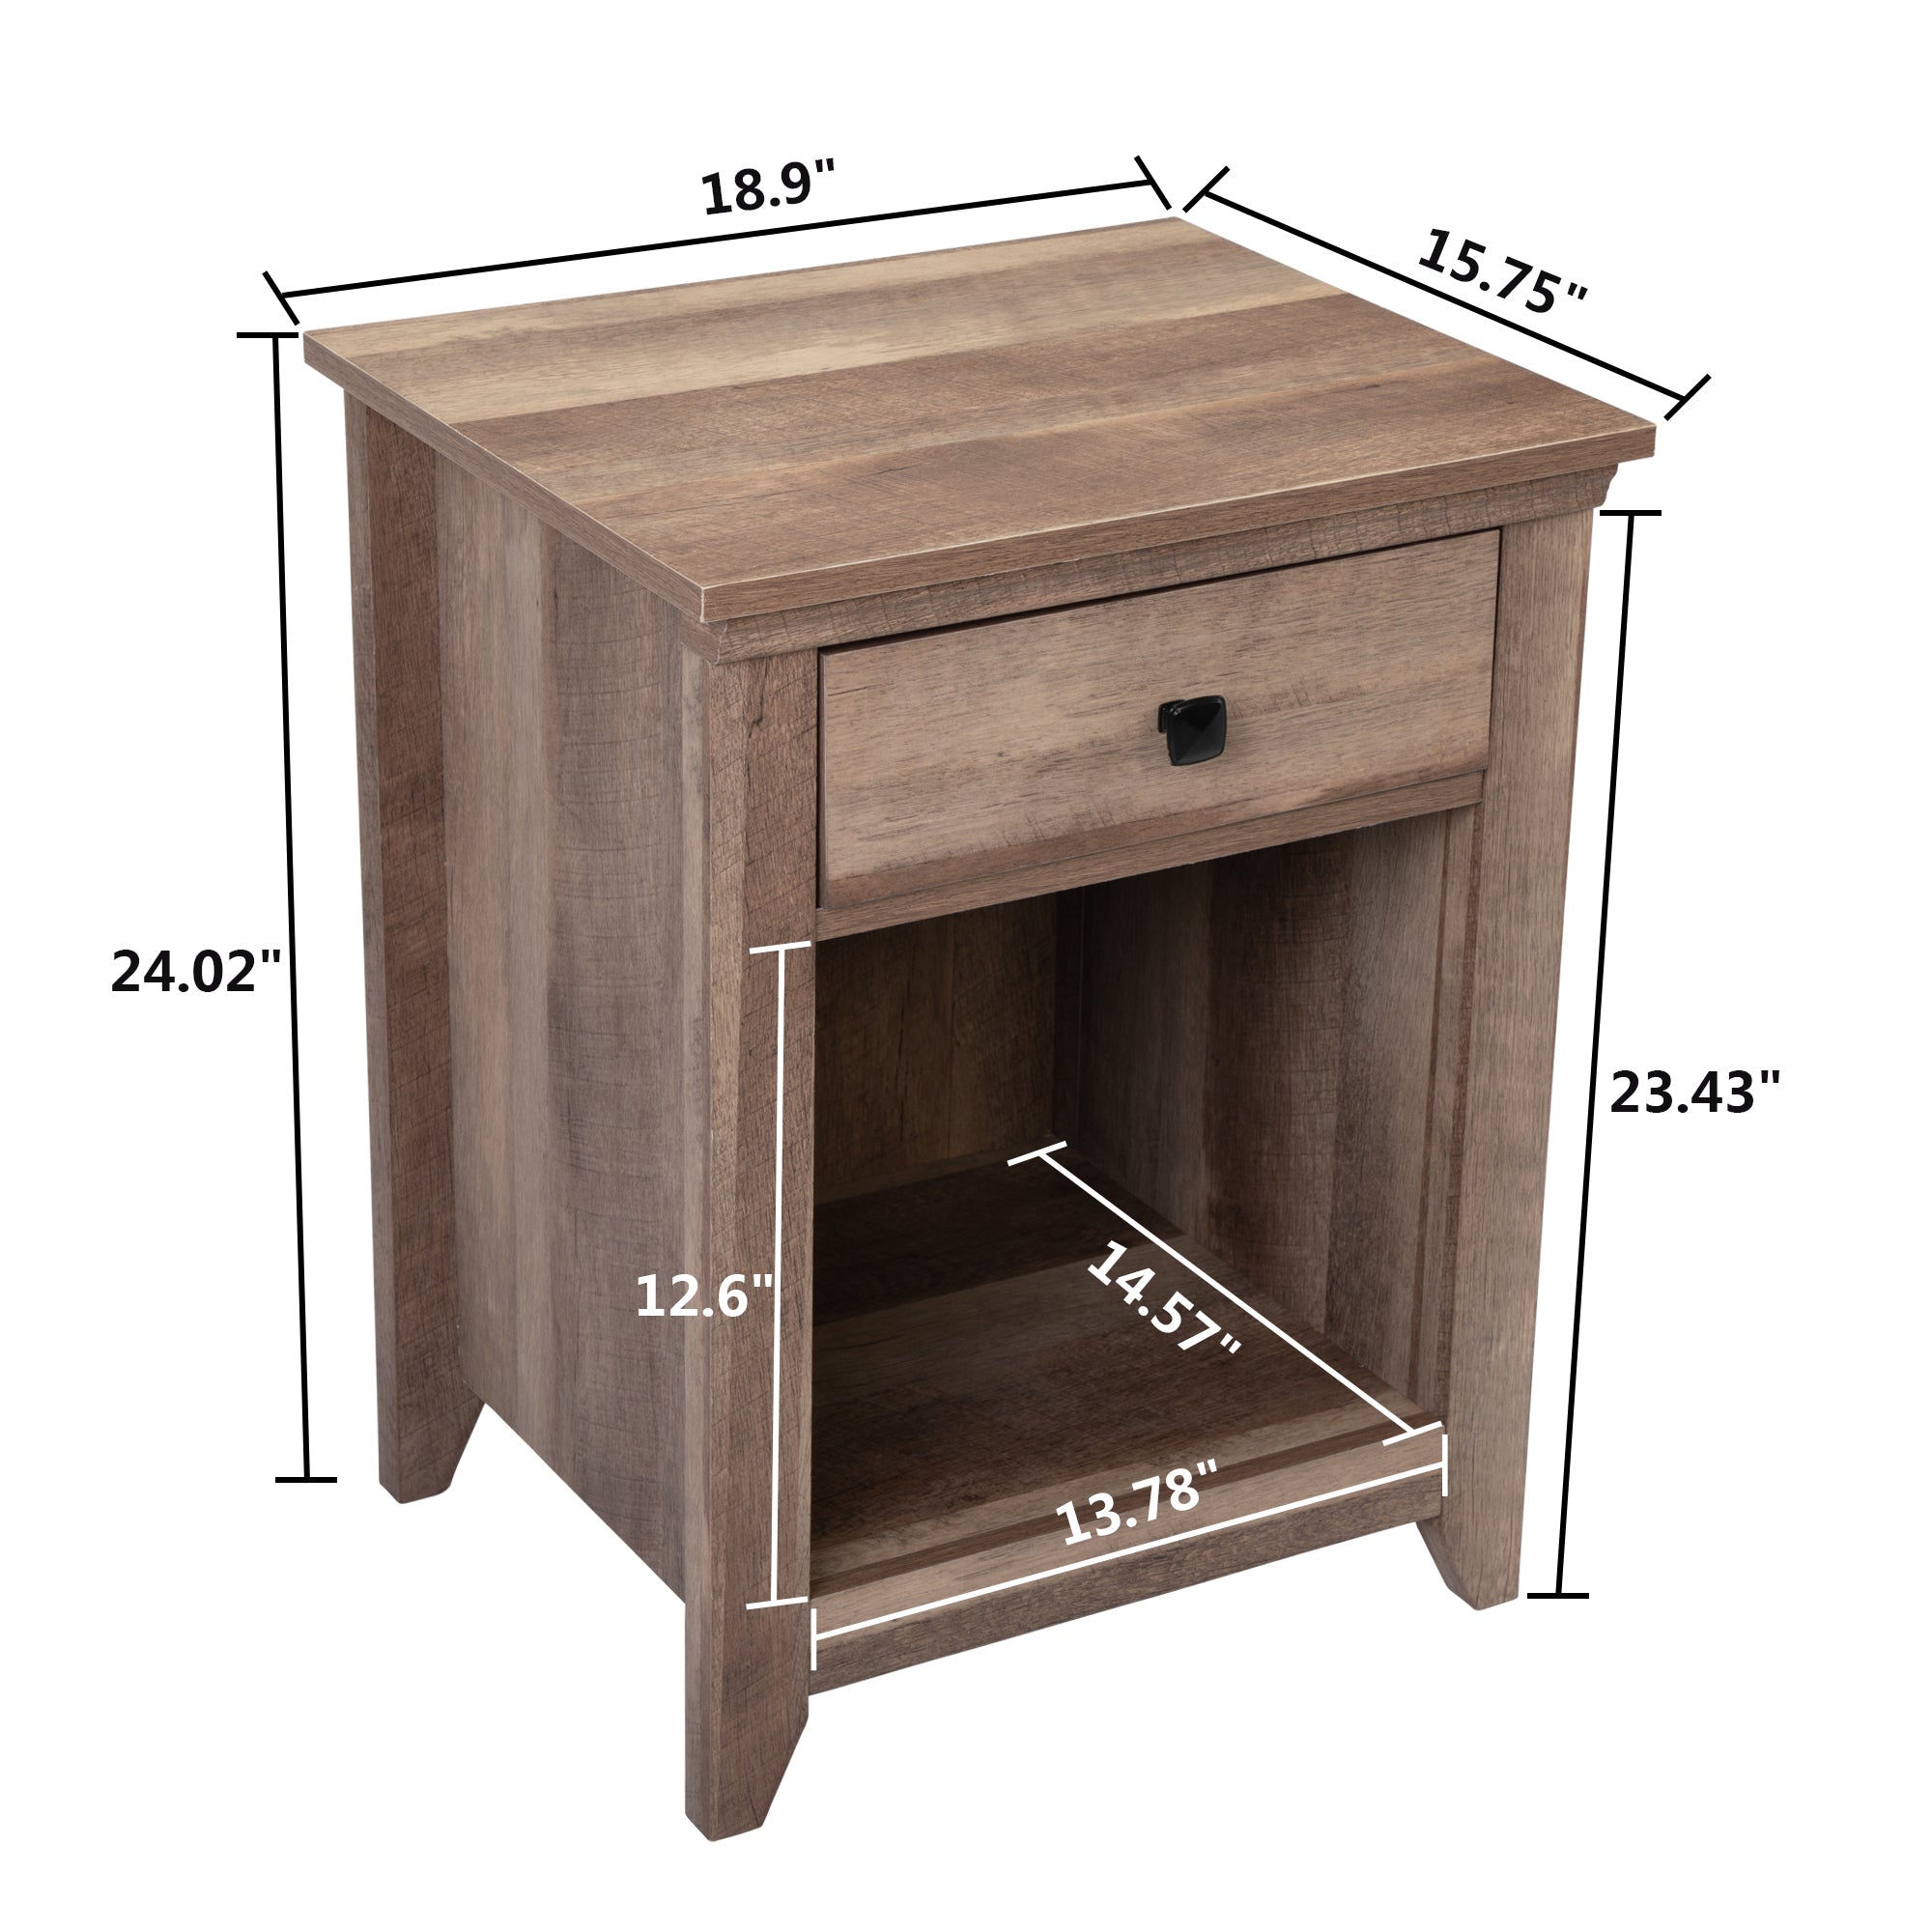 Farmhouse Nightstand, Bedside Table with Drawer and Shelf - Light Brown